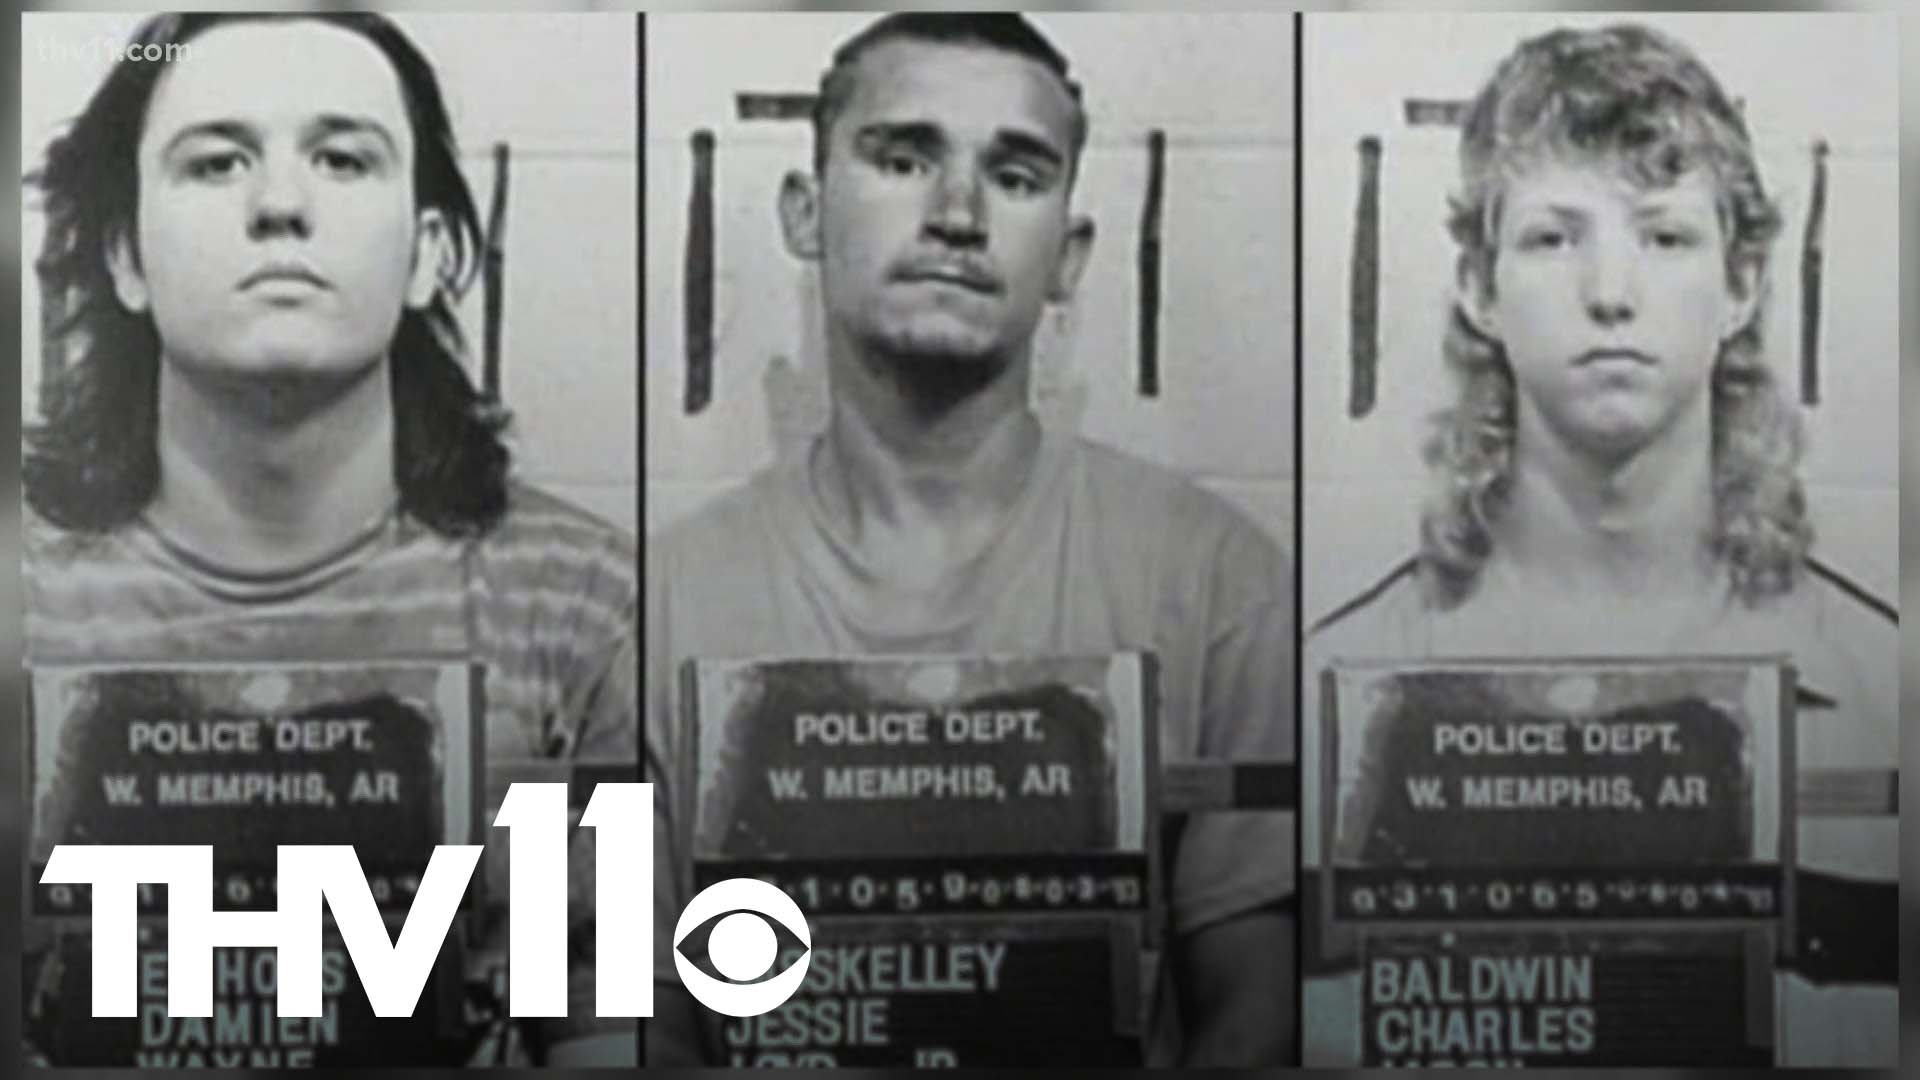 The West Memphis Three have battled for answers for decades, but soon the group of men could potentially have a second opportunity to prove their innocence.